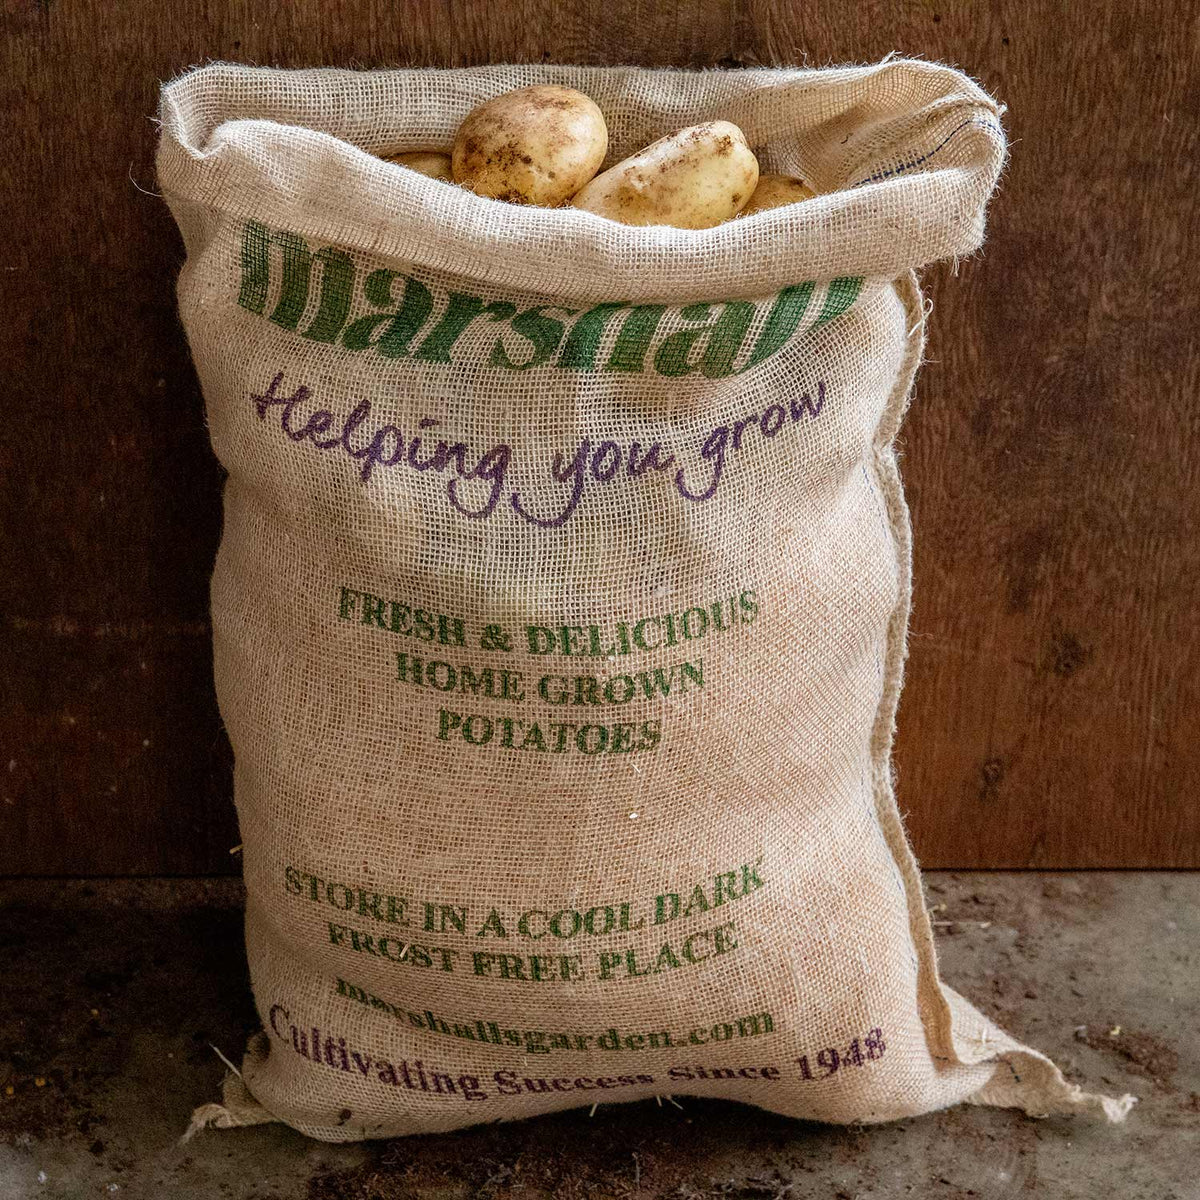 How To Grow Potatoes In A Hessian Bag 